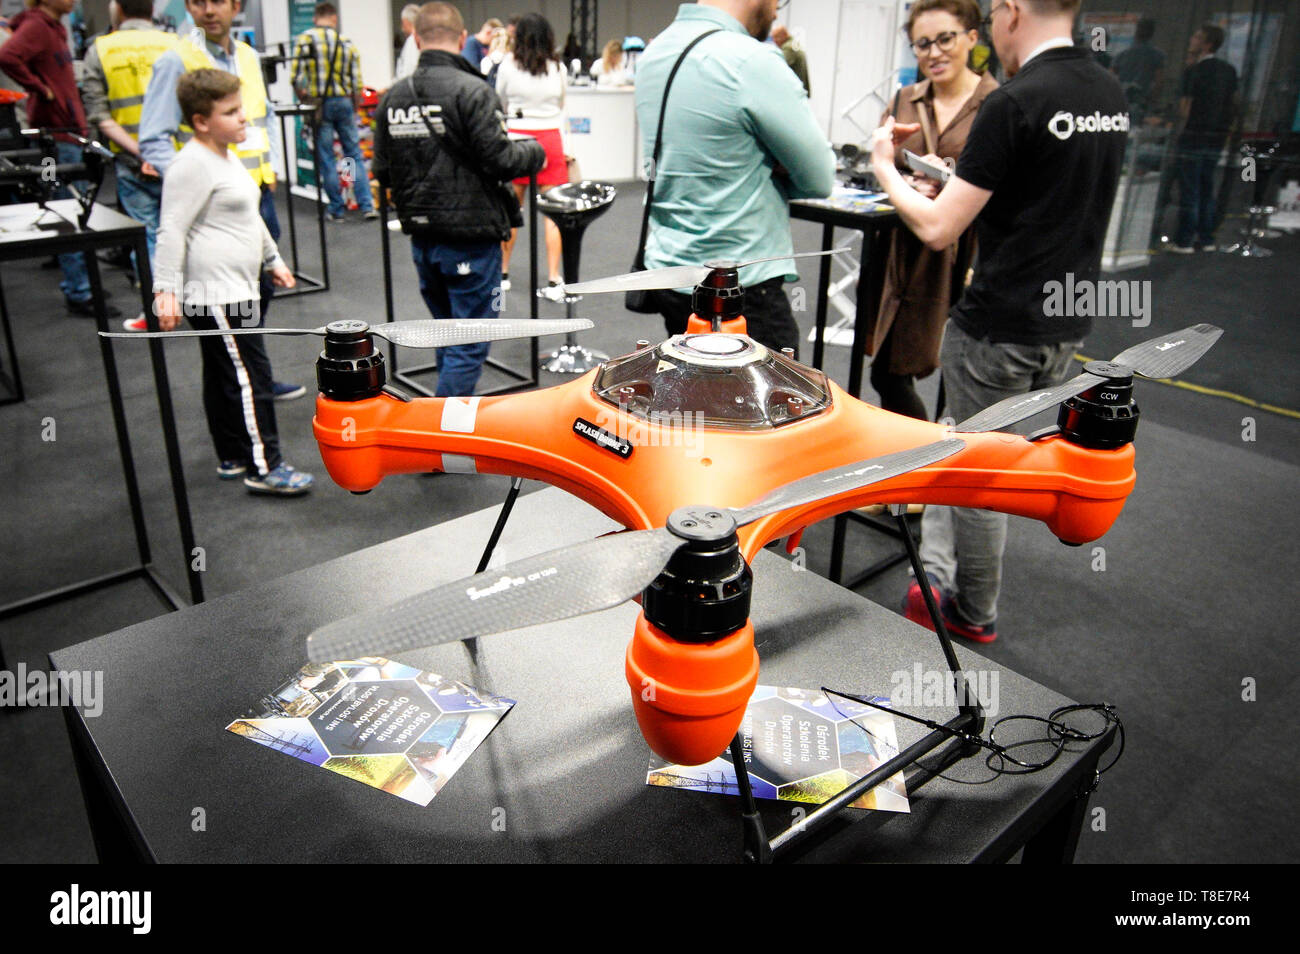 Warsaw, Poland. 12th May, 2019. A water splash proof UAV is seen at the Electronics Show in Warsaw, Poland, on May 12, 2019. The Electronics Show in Warsaw, one of the biggest consumer electronics and new technology trade show in Poland, was held here with over 350 exhibitors from across the world. Credit: Jaap Arriens/Xinhua/Alamy Live News Stock Photo